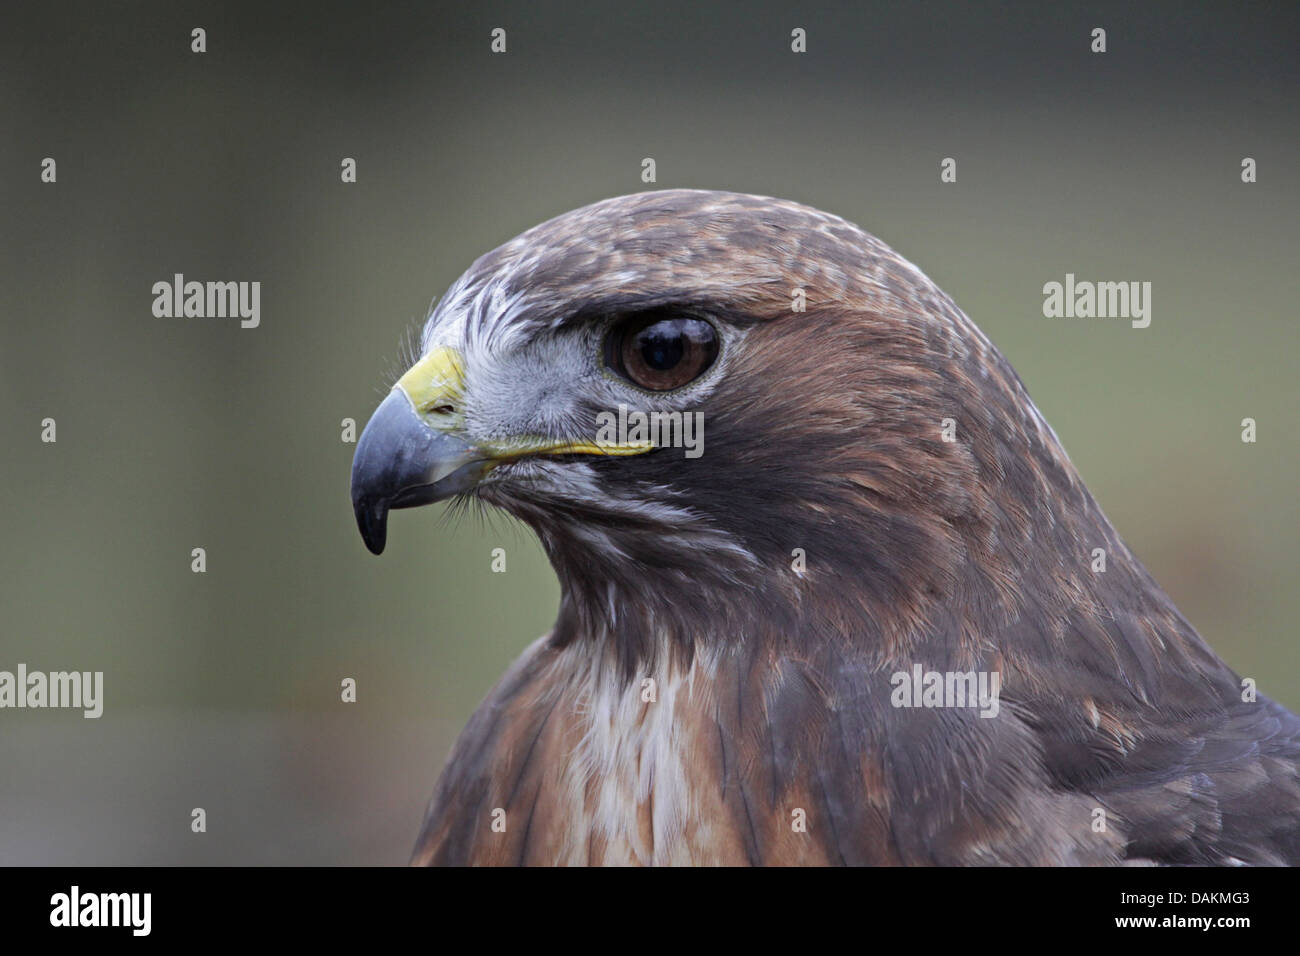 Red-tailed Hawk Portrait Stock Photo